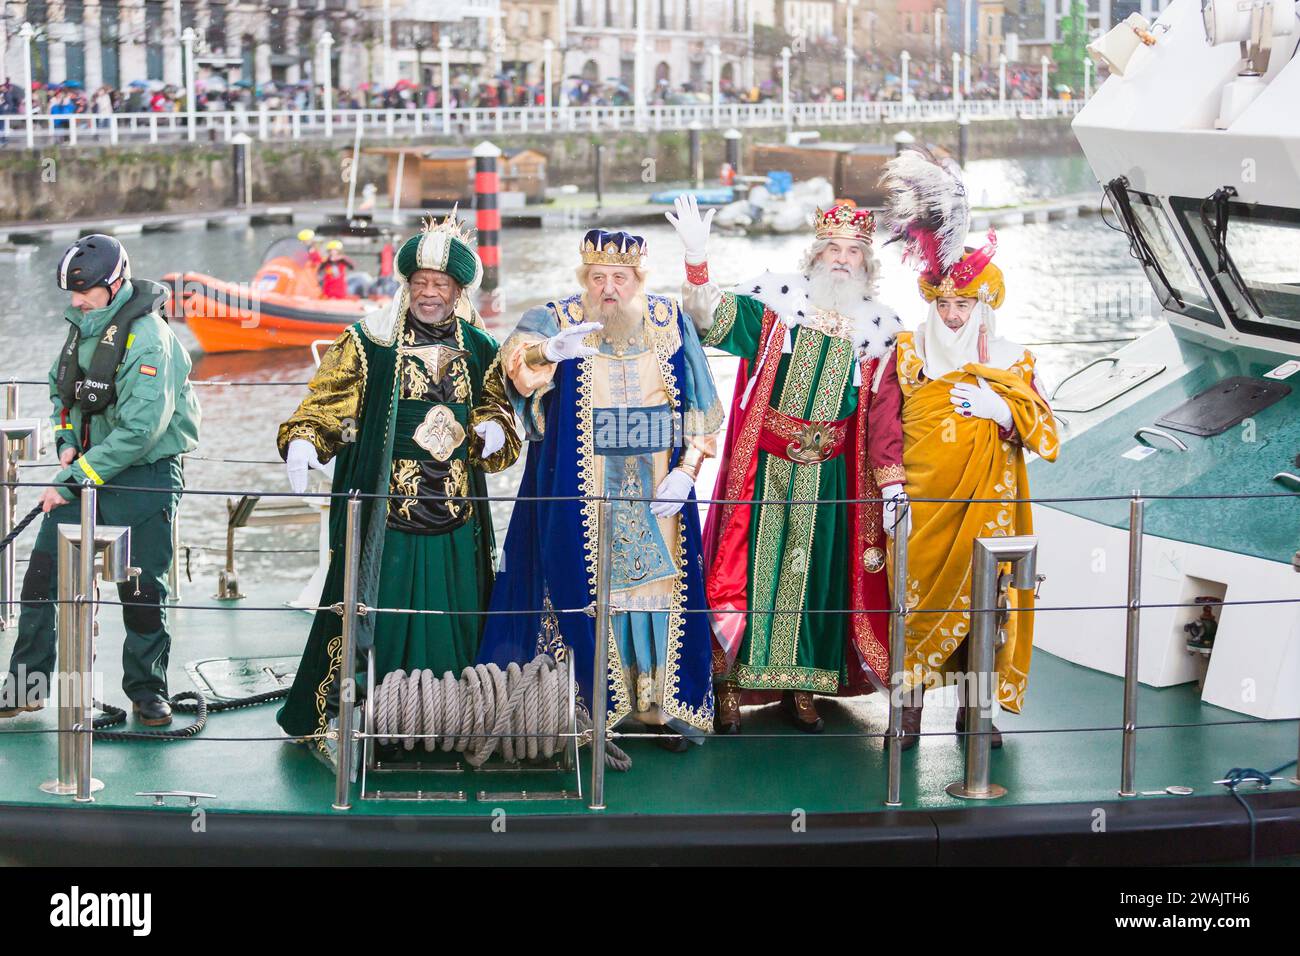 05.01.2024 Arrival of the Three Wise Men by boat to Gijón, northern Spain. The wizards of the East. Melchior, Gaspar and Baltasar, after the birth of Jesus of Nazareth. In Spain, starting in the 19th century, the tradition began of turning Twelfth Night (the night before the Epiphany) into a children's party with gifts for the children, in imitation of what was done in other countries on Christmas Day, in tribute to the eastern saint Saint Nicholas. It was in 1866 when the first Three Wise Men parade was held in Alcoy, a tradition that spread to the rest of the country Stock Photo